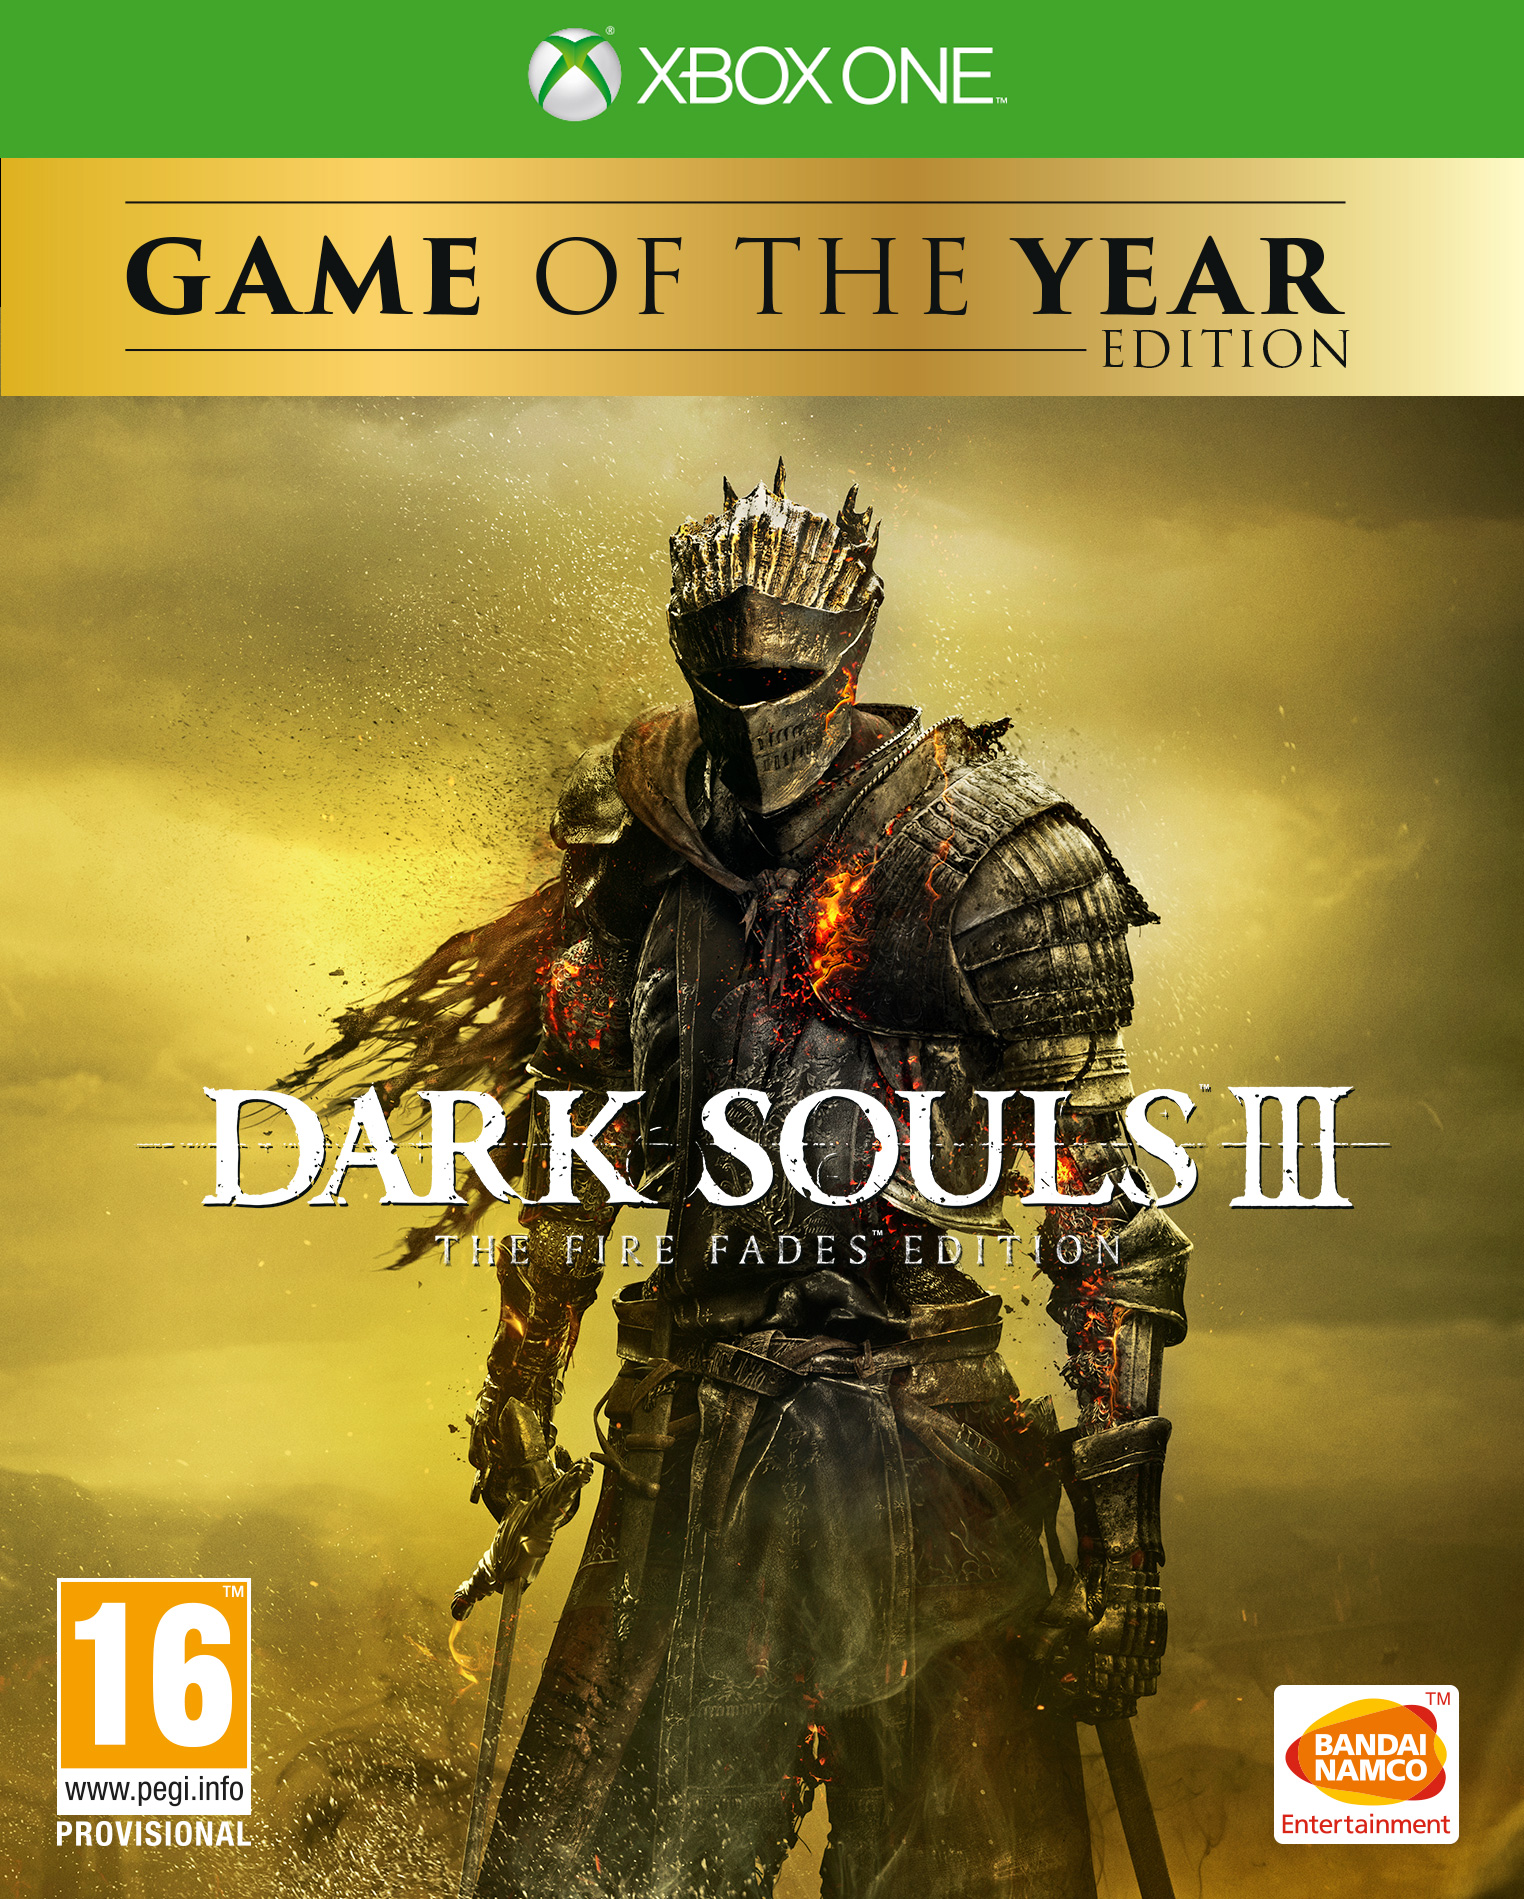 Dark Souls III Game Of The Year Edition